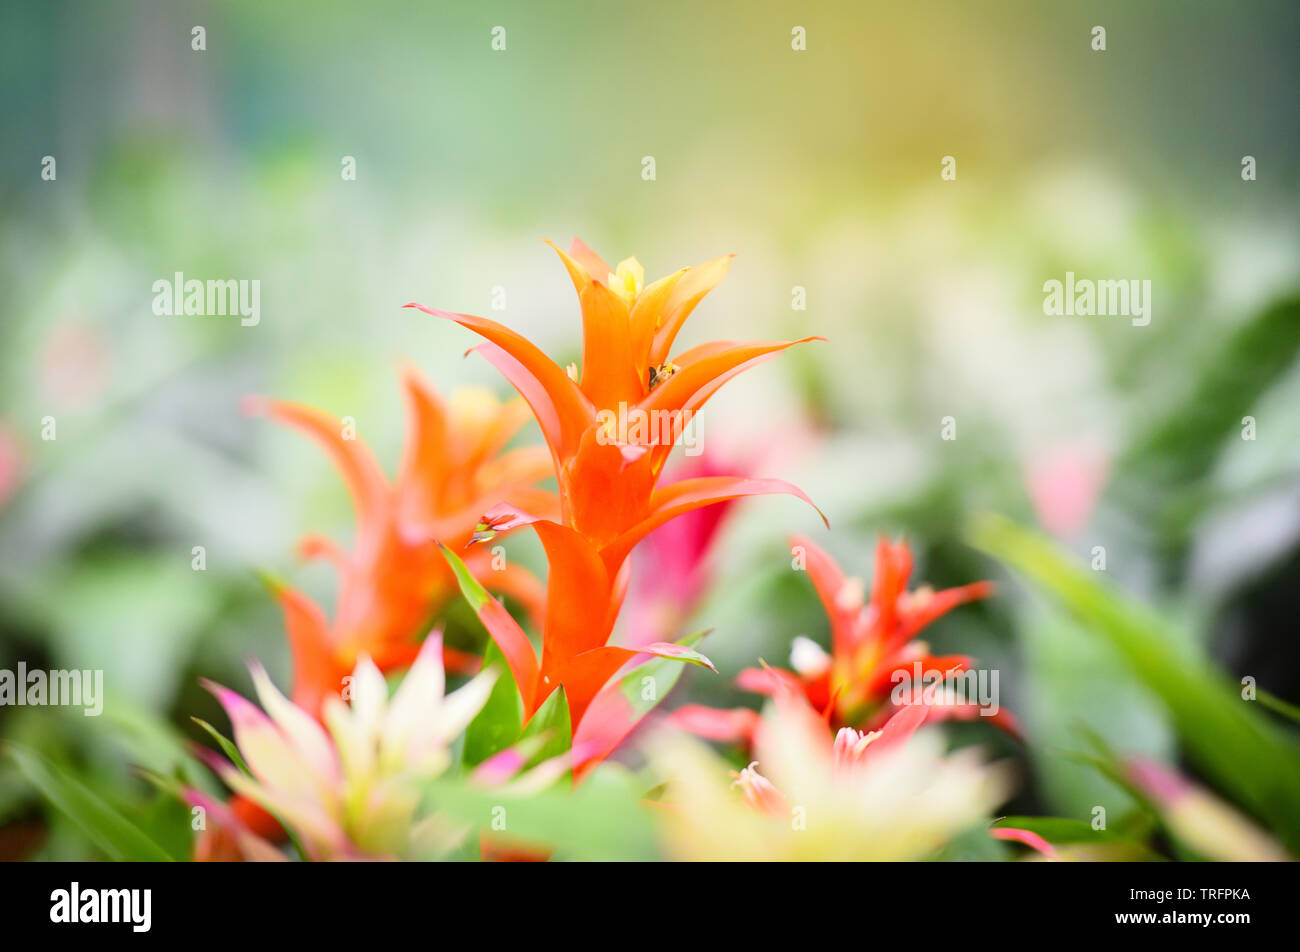 Colorful of bromeliad flower decorate in the garden nursery plants background Stock Photo